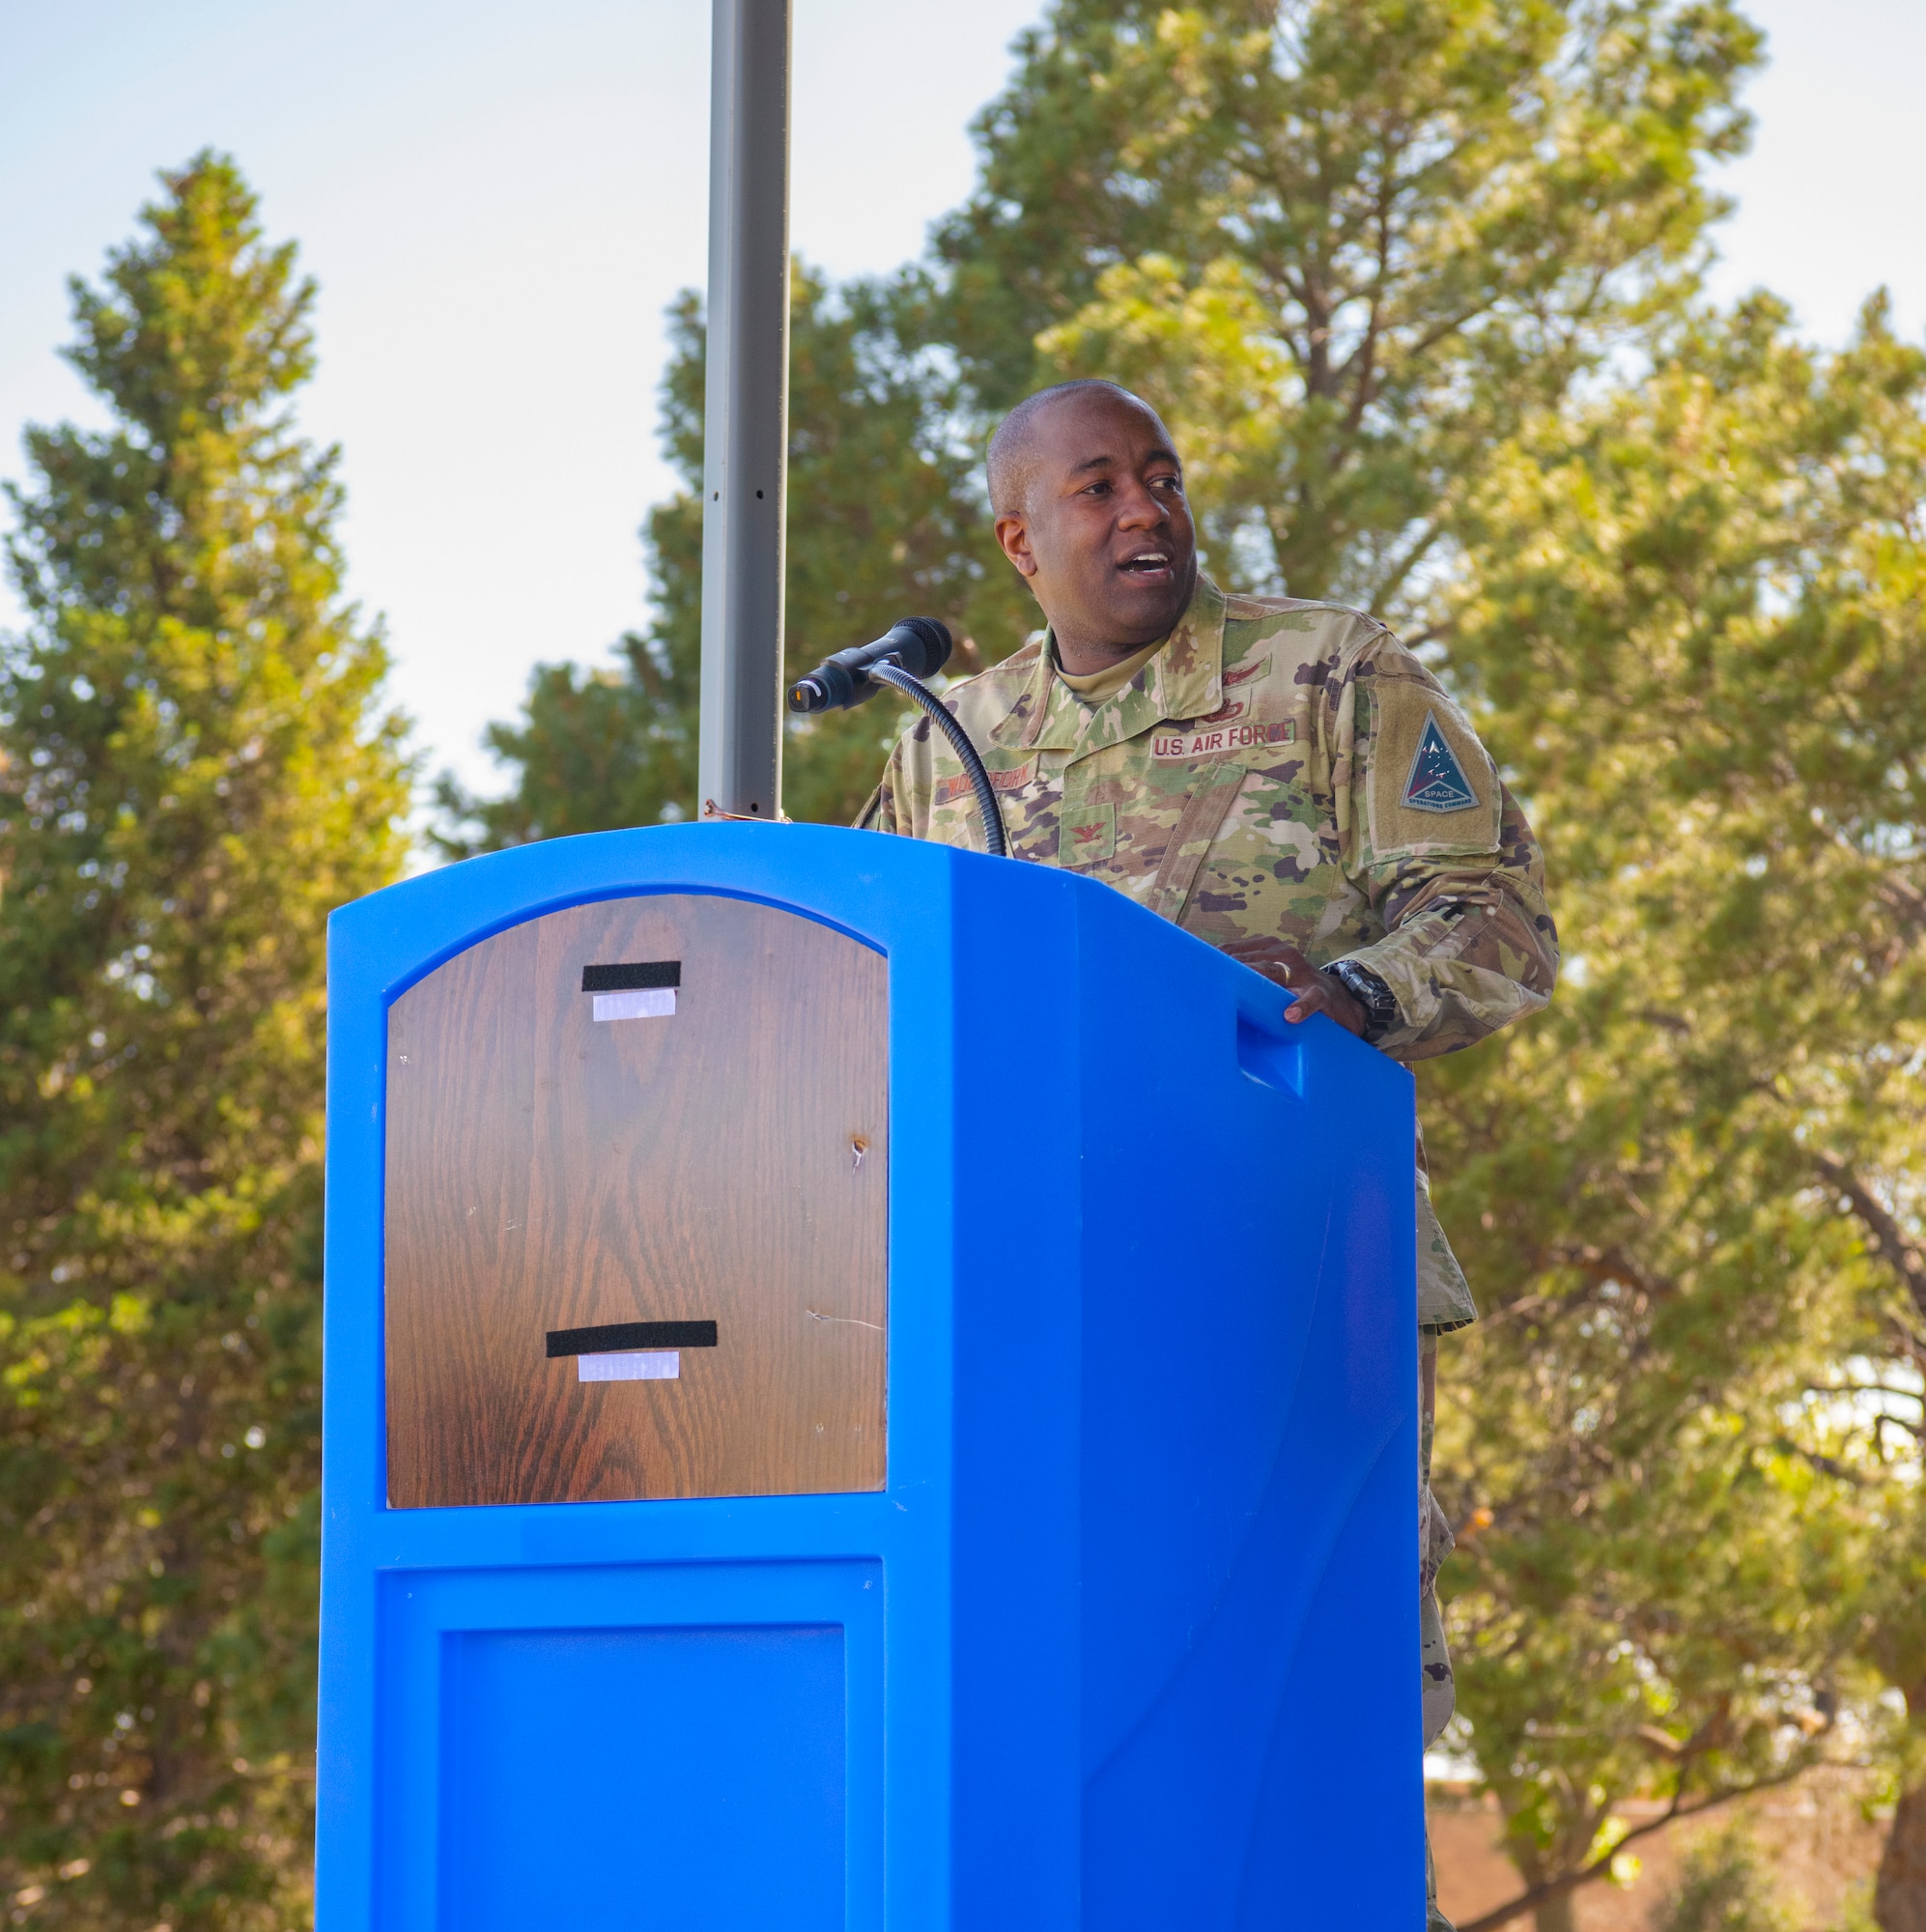 U.S. Air Force Col. Dennis Woodfork II, Space Base Delta 1, individual mobilization augmentee to the Commander, delivers a speech during the Juneteenth Festival at Peterson Space Force Base, Colorado, June 16, 2022.